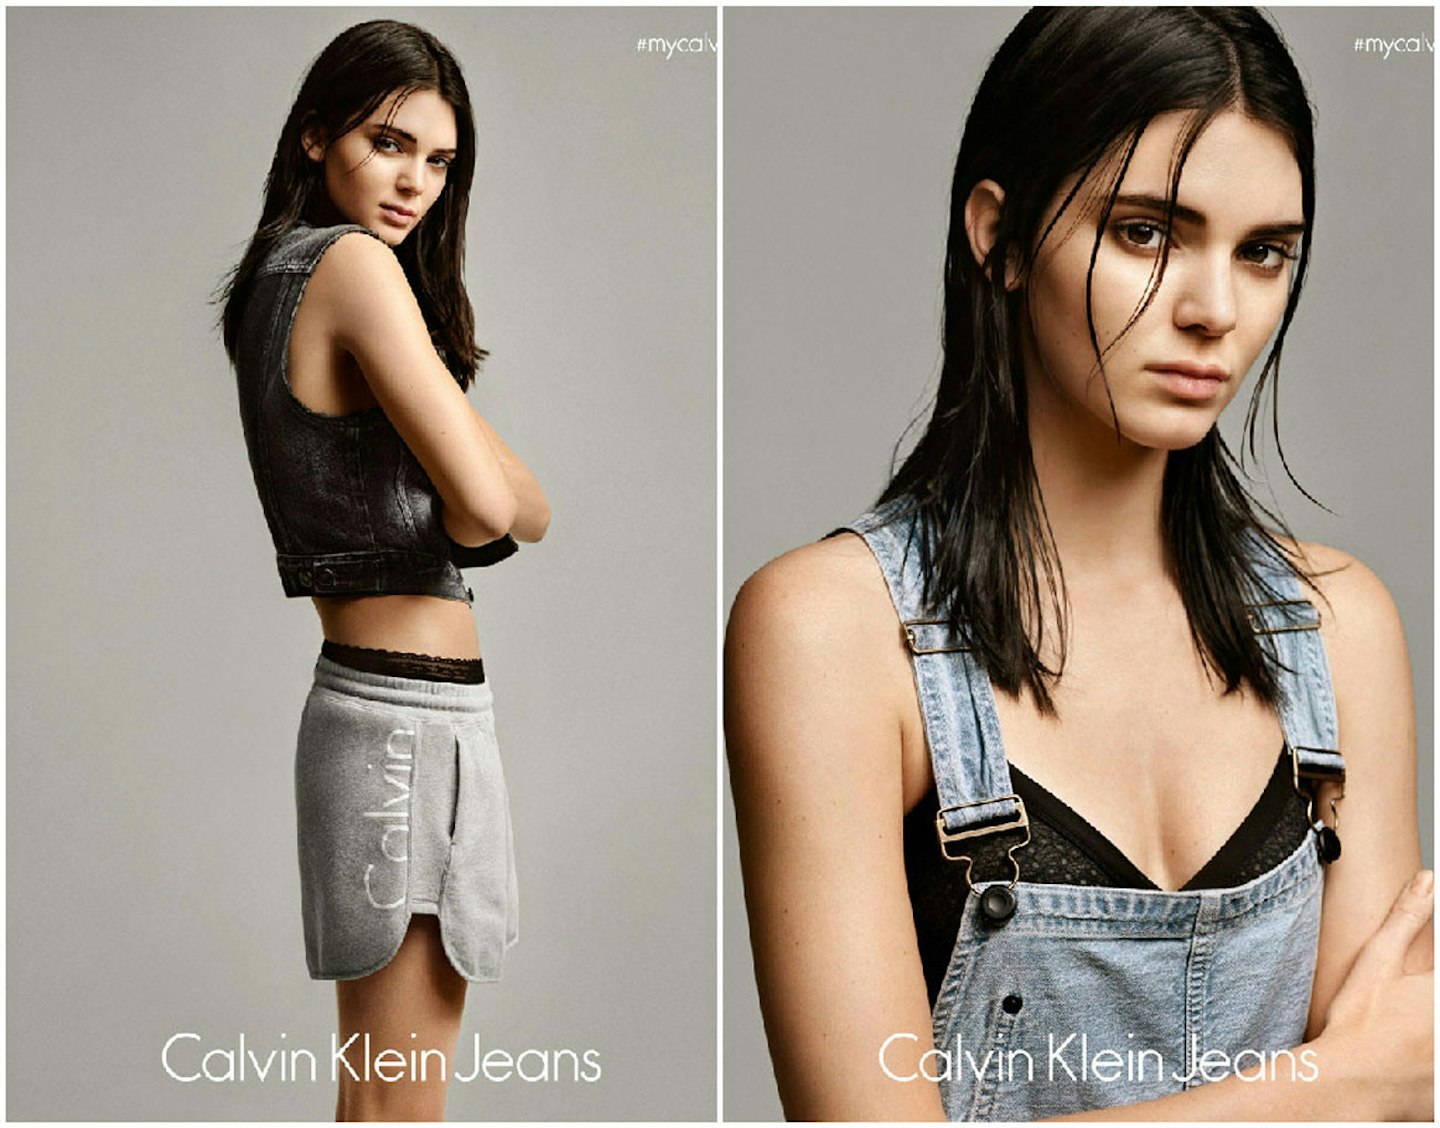 Kendall Jenner celebrates her Calvin Klein collaboration with LOVE